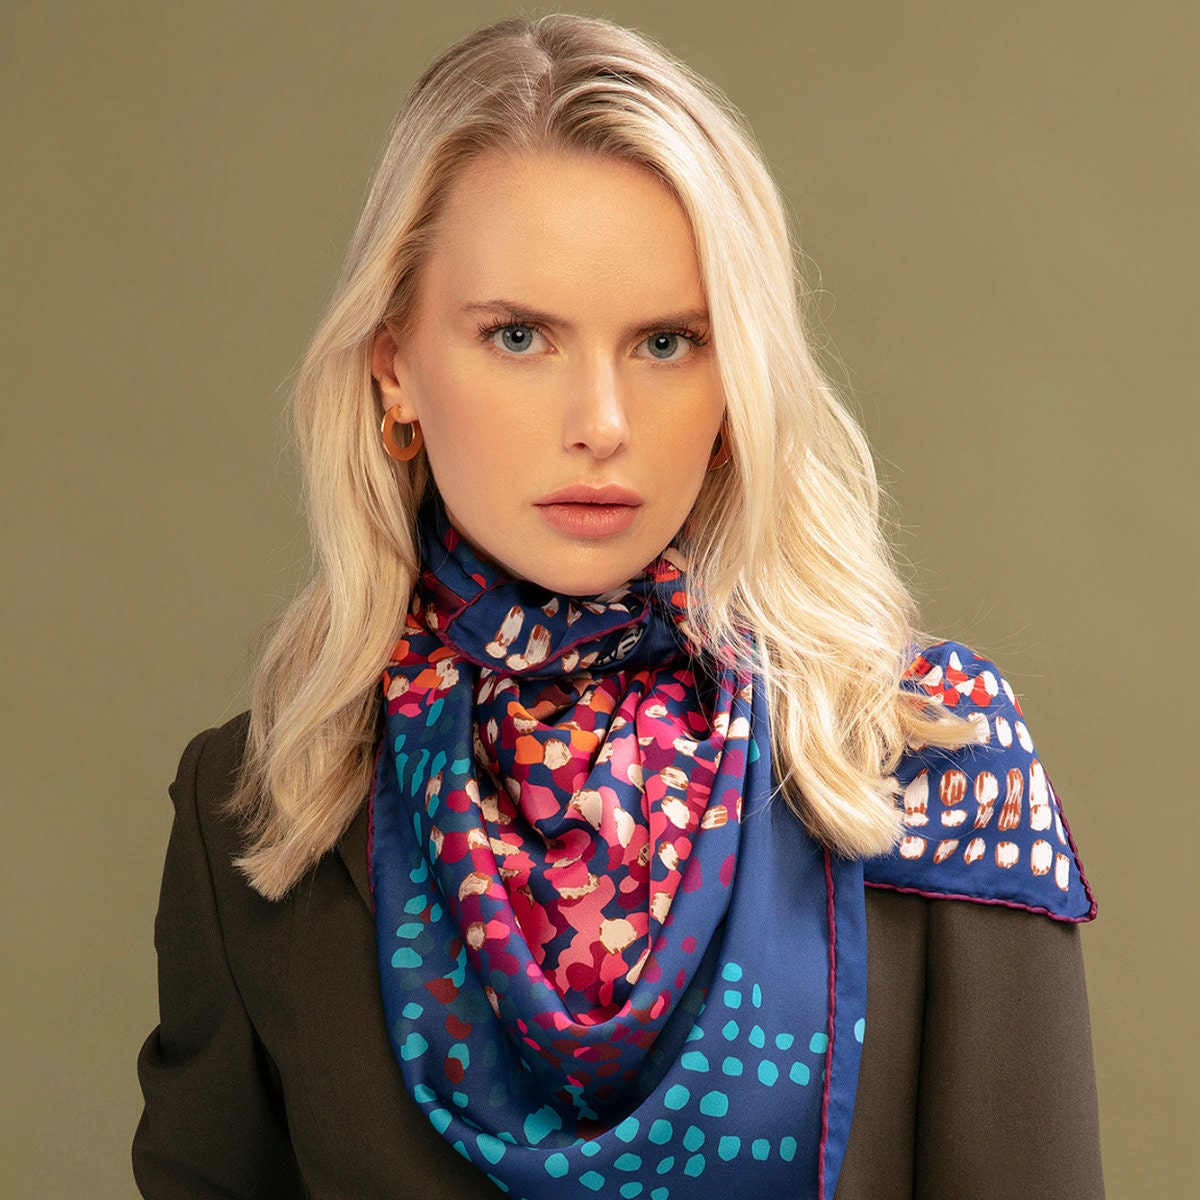 Breathable Digital Crack Printed Premium Scarves with Gift Packed Set FREE Bracelet Silk and River 100% Handmade Scarf